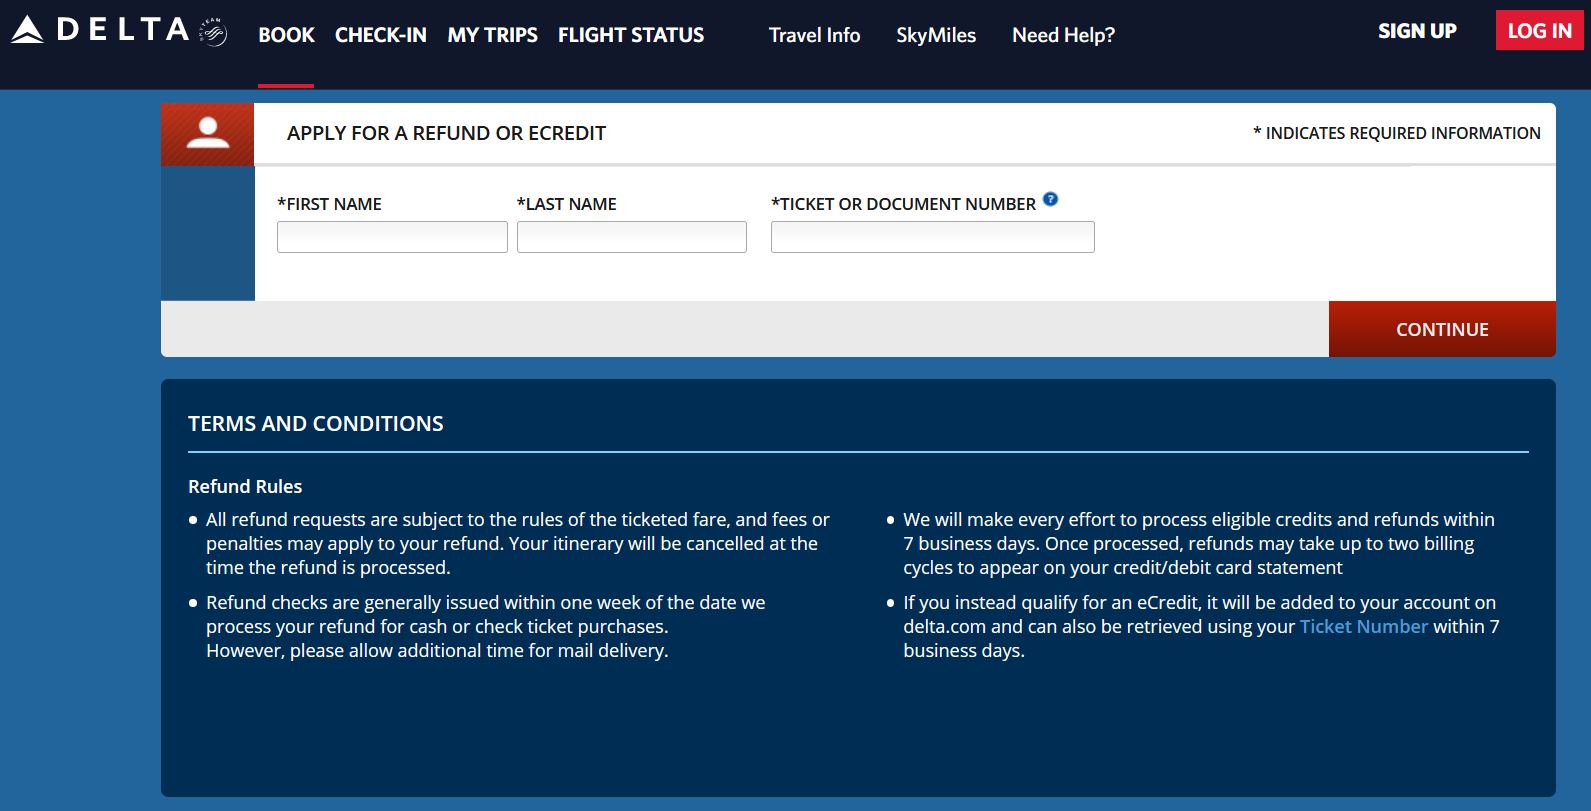 delta-airlines-refund-policy-how-to-get-a-refund-from-delta